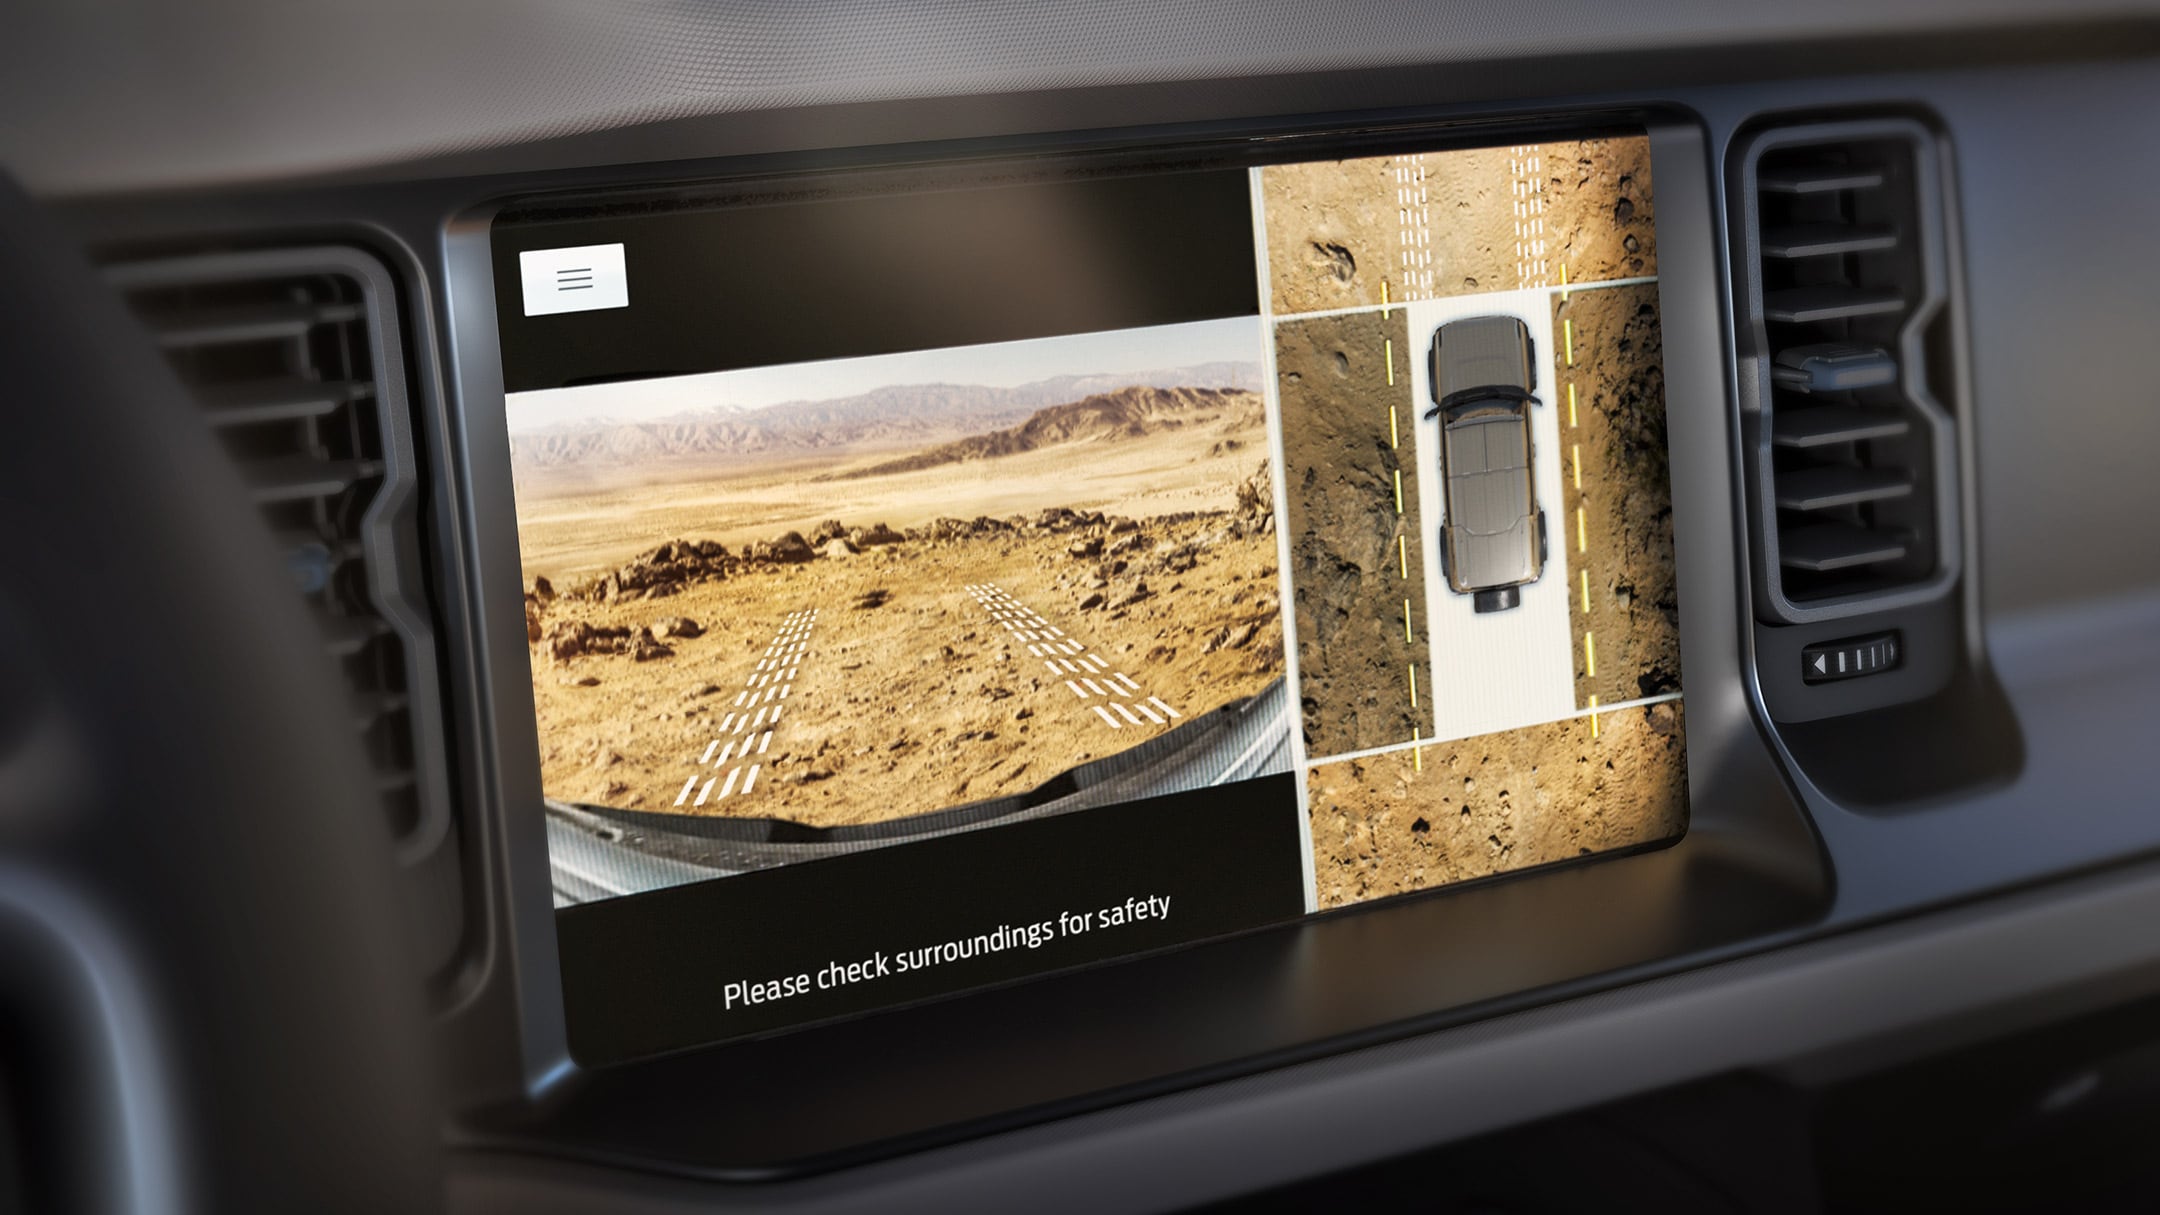 Close-up of the touchscreen showing the 360 camera view